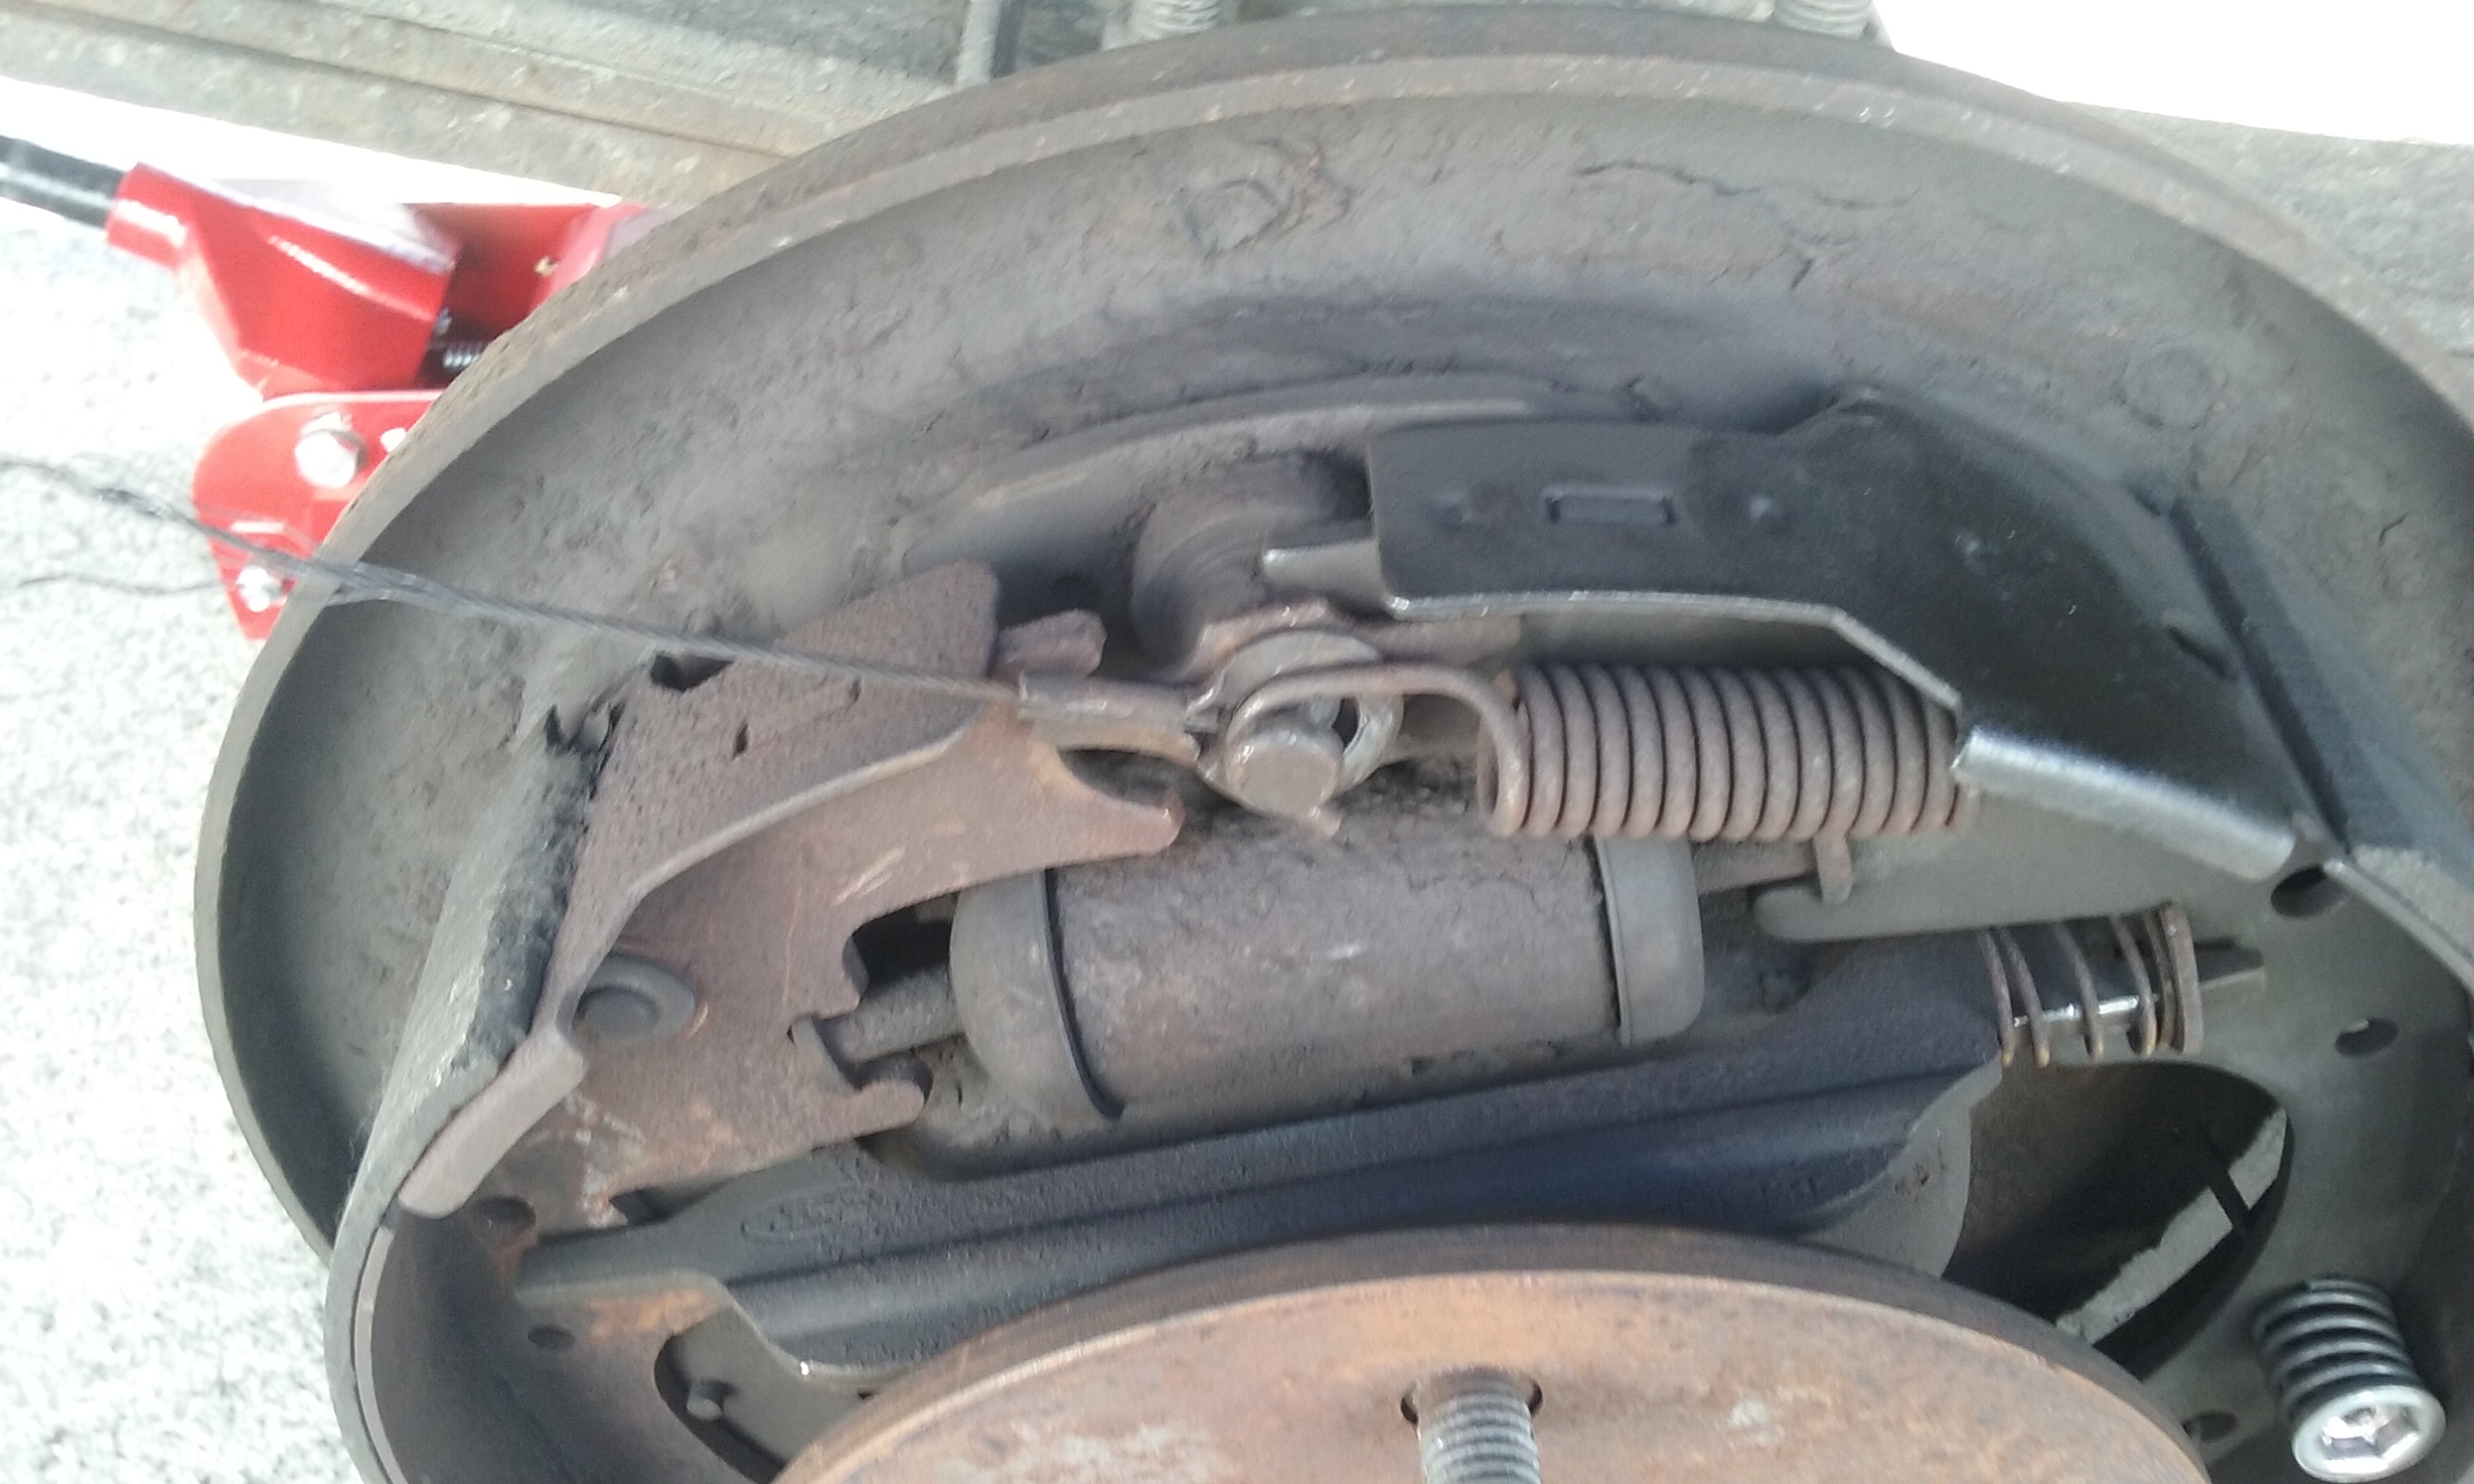 No brake shoes should be rusty if they are brand new from Auto zone